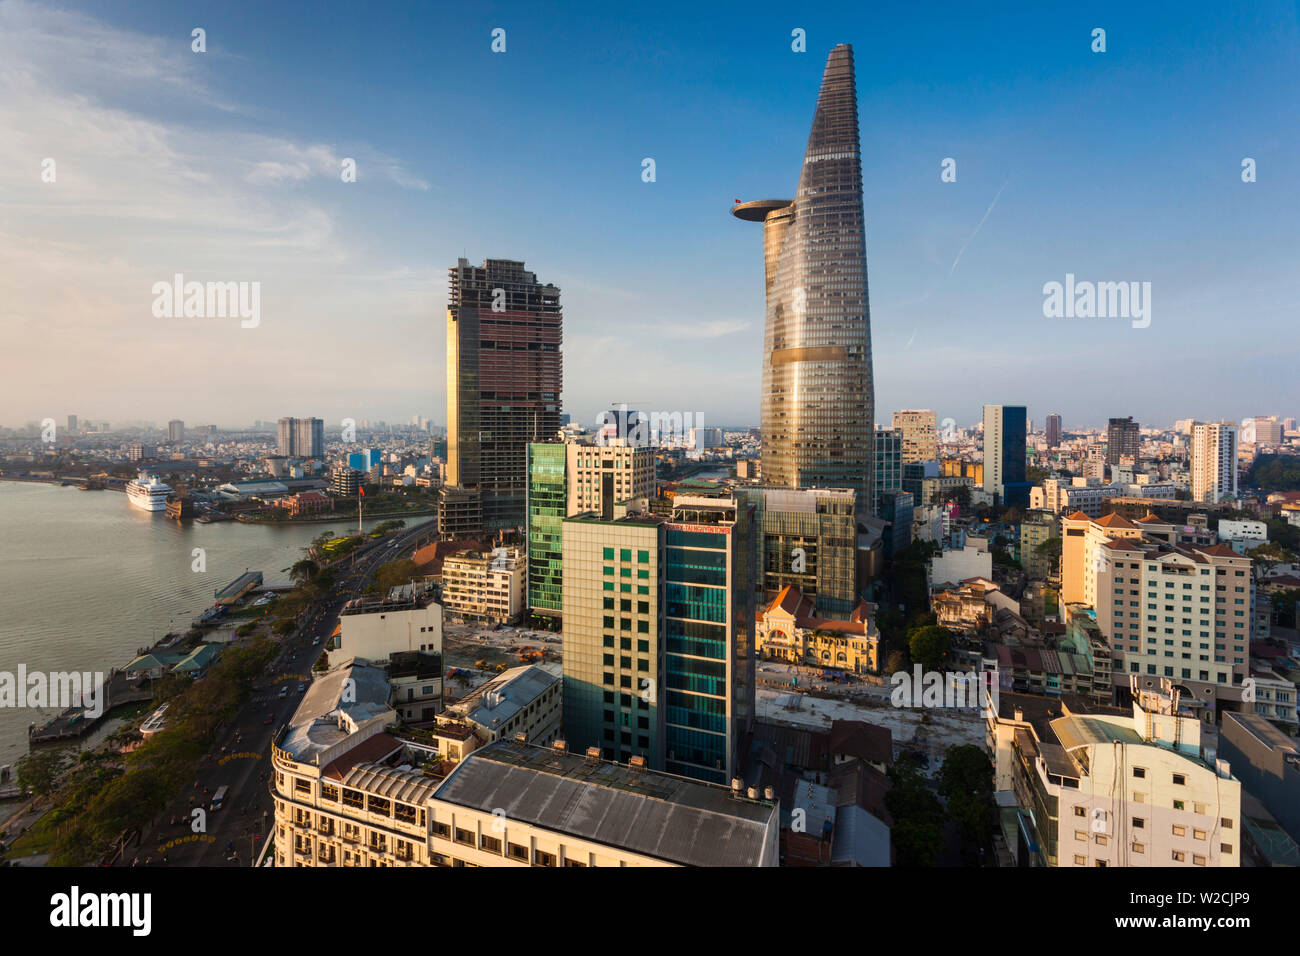 Vietnam, Ho Chi Minh City, elevated city view with Bitexco Tower, dawn Stock Photo